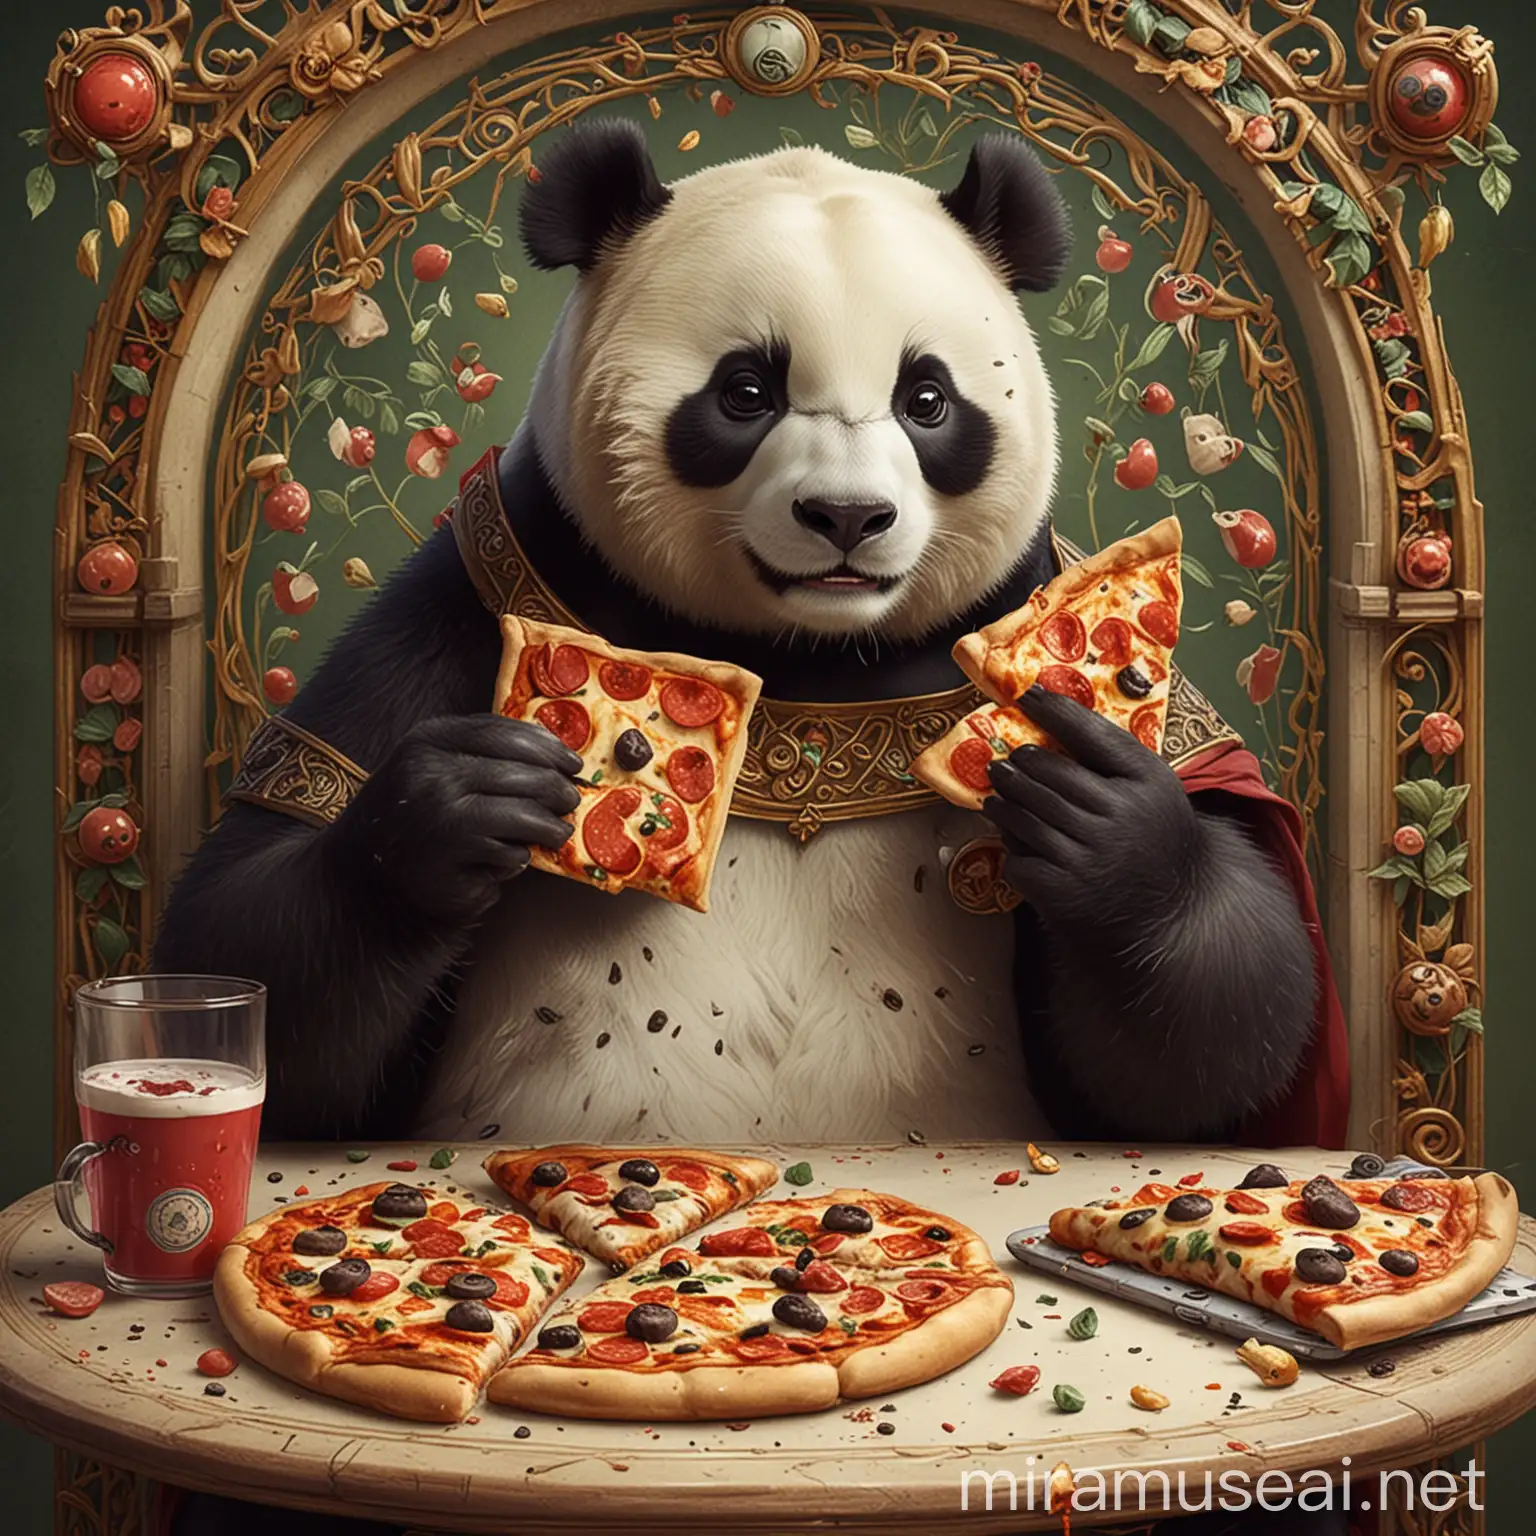 art nouveau panda playing video games and eating pizza